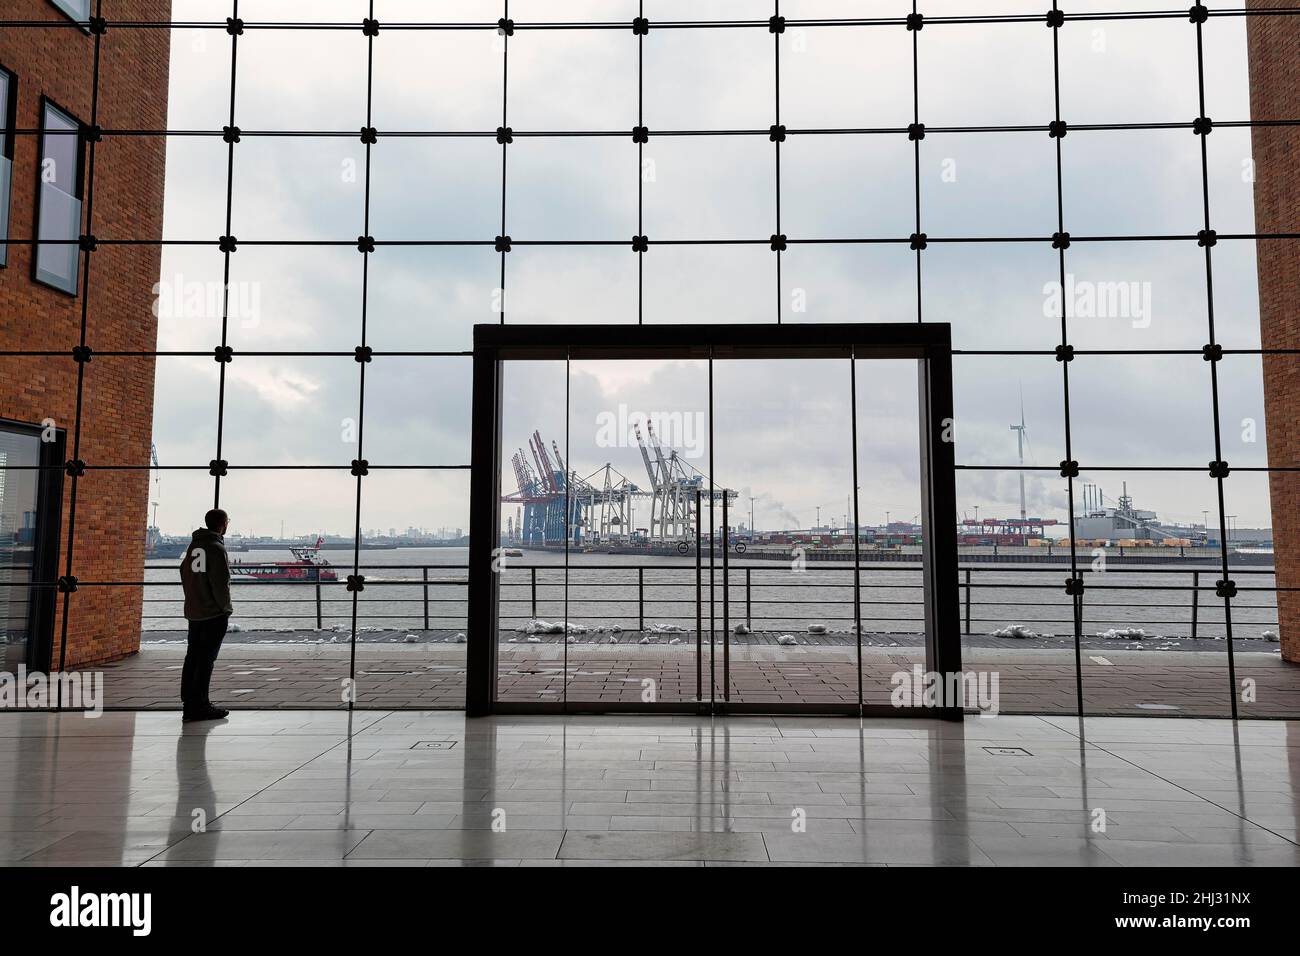 Young man standing in front of modern glass facade with large door and looking at the harbour, dreary winter weather, backlight, Holzhafen Ost Stock Photo